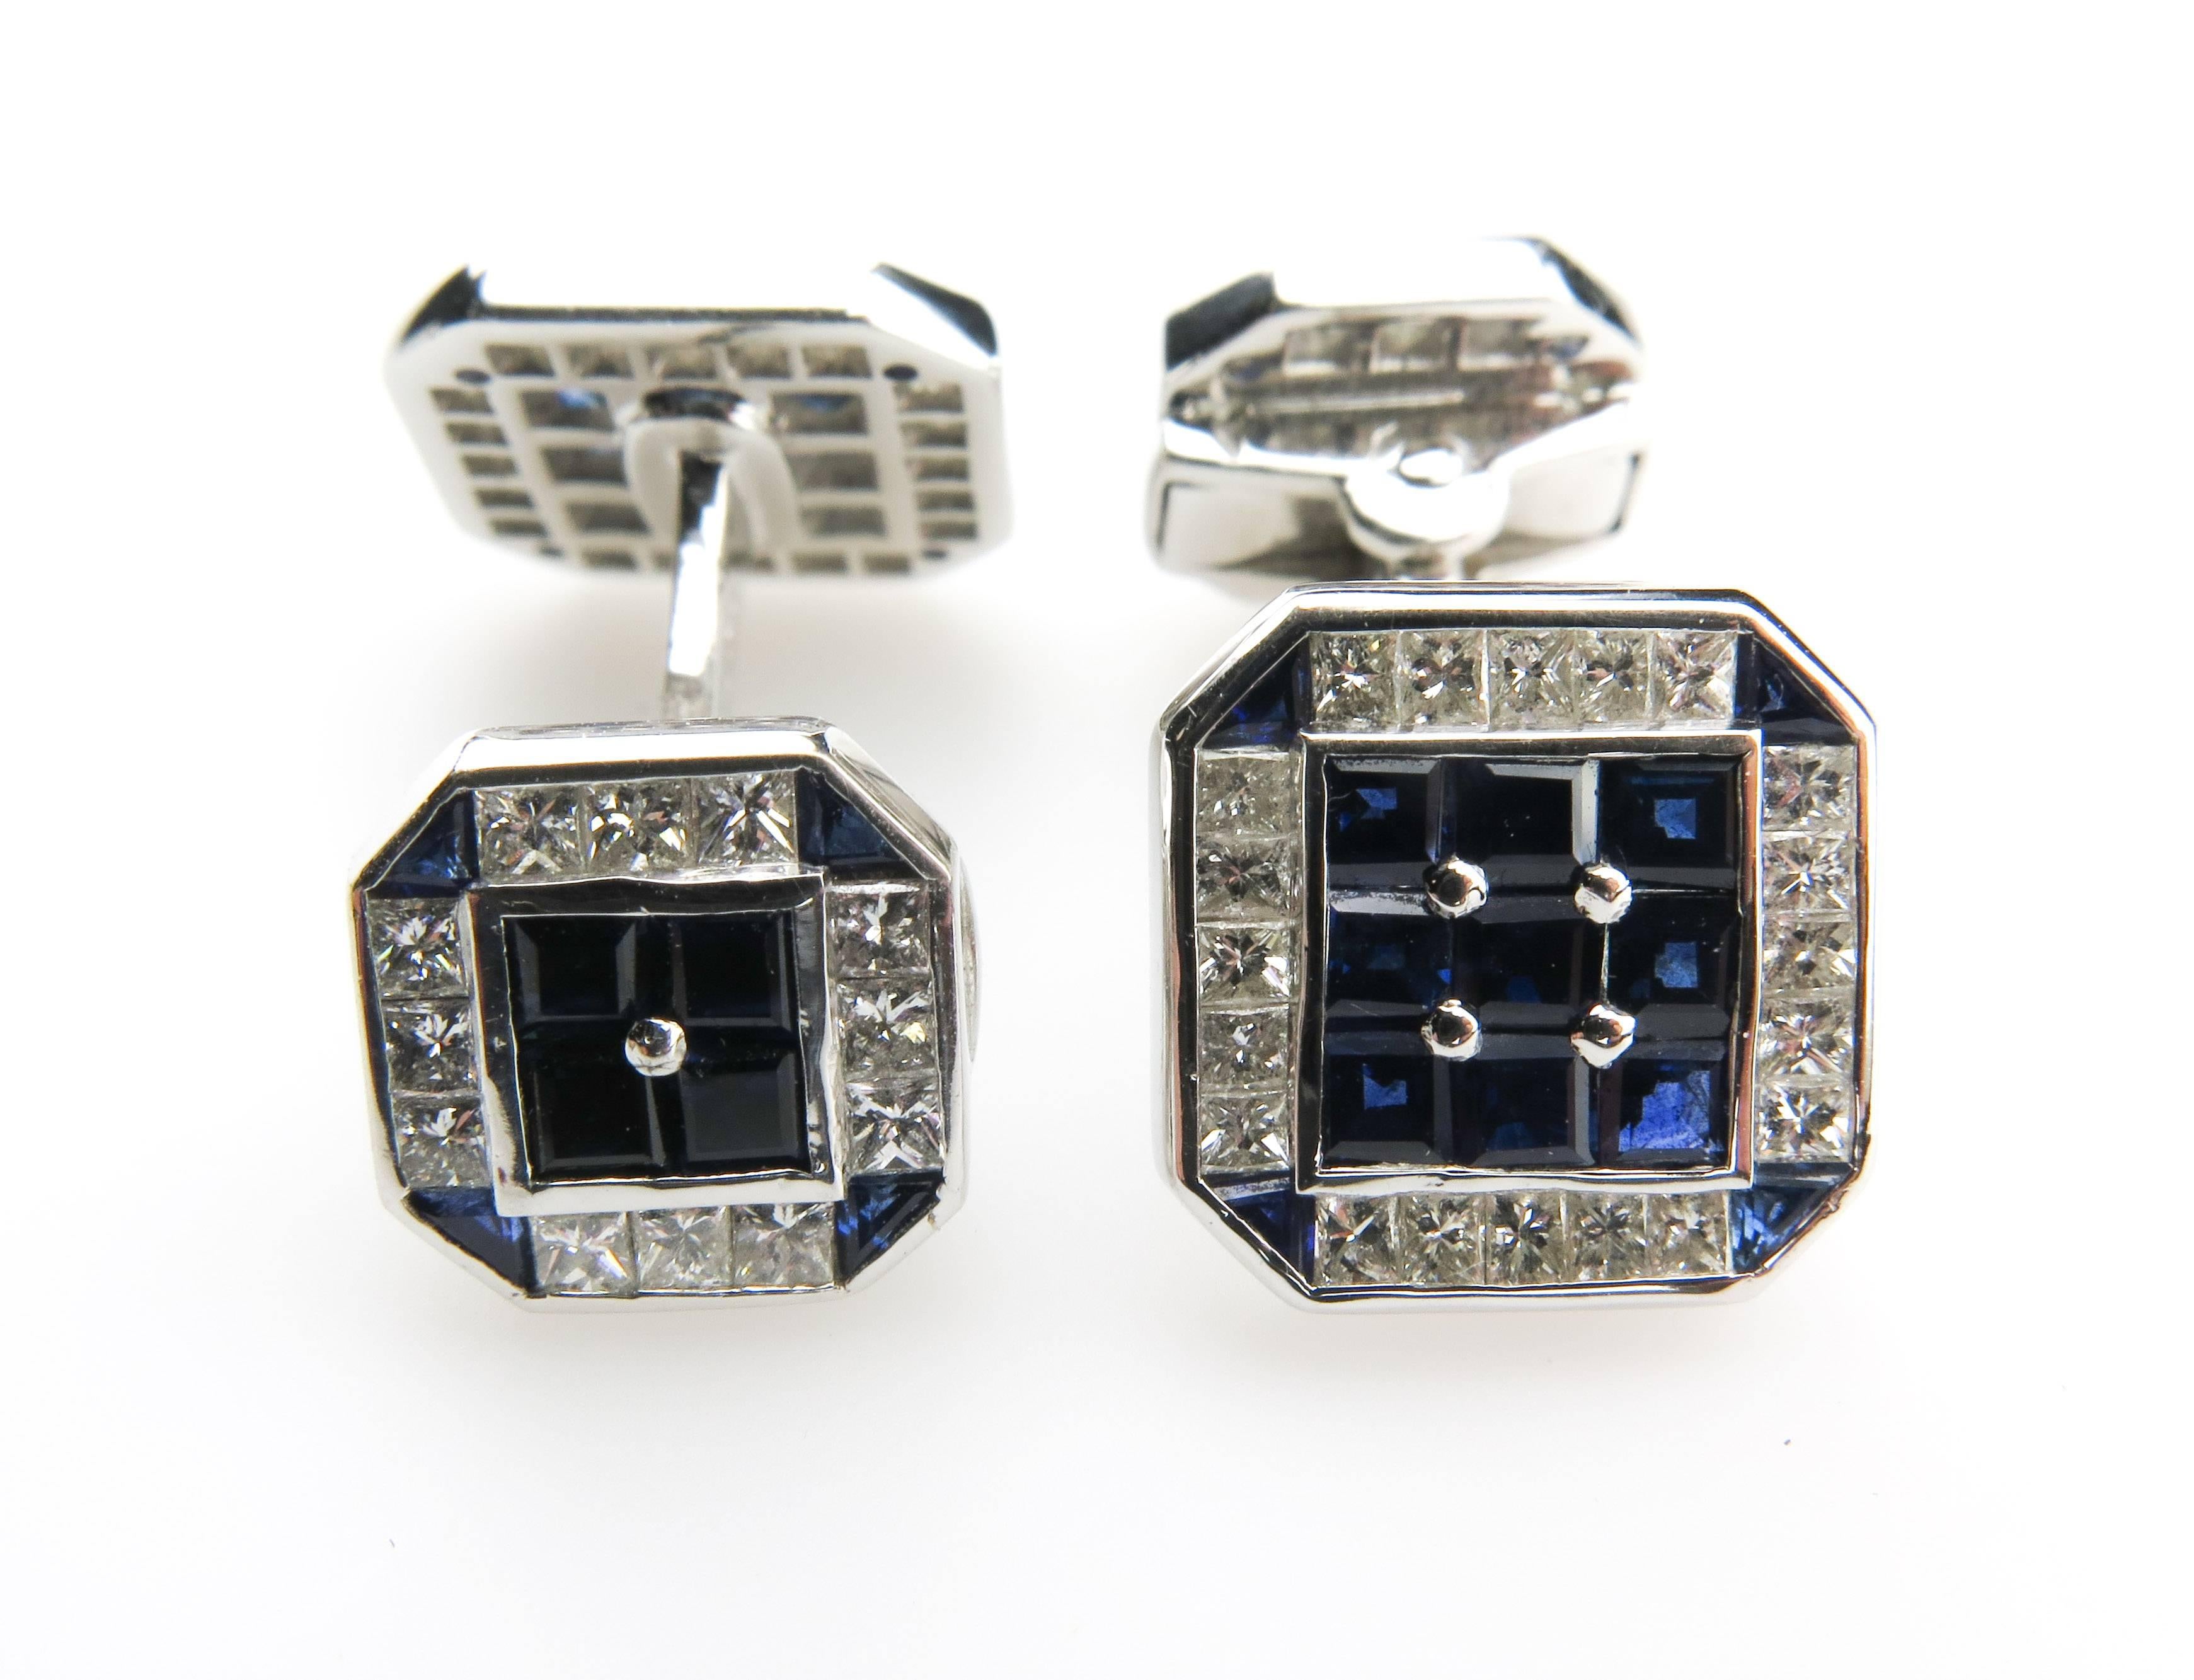 A truly luxurious set of cufflinks and studs  - made to have and to hold. For the gentleman with style, these square cufflinks have been made from the very finest materials. Stunning diamonds and striking blue sapphires have been delicately detailed